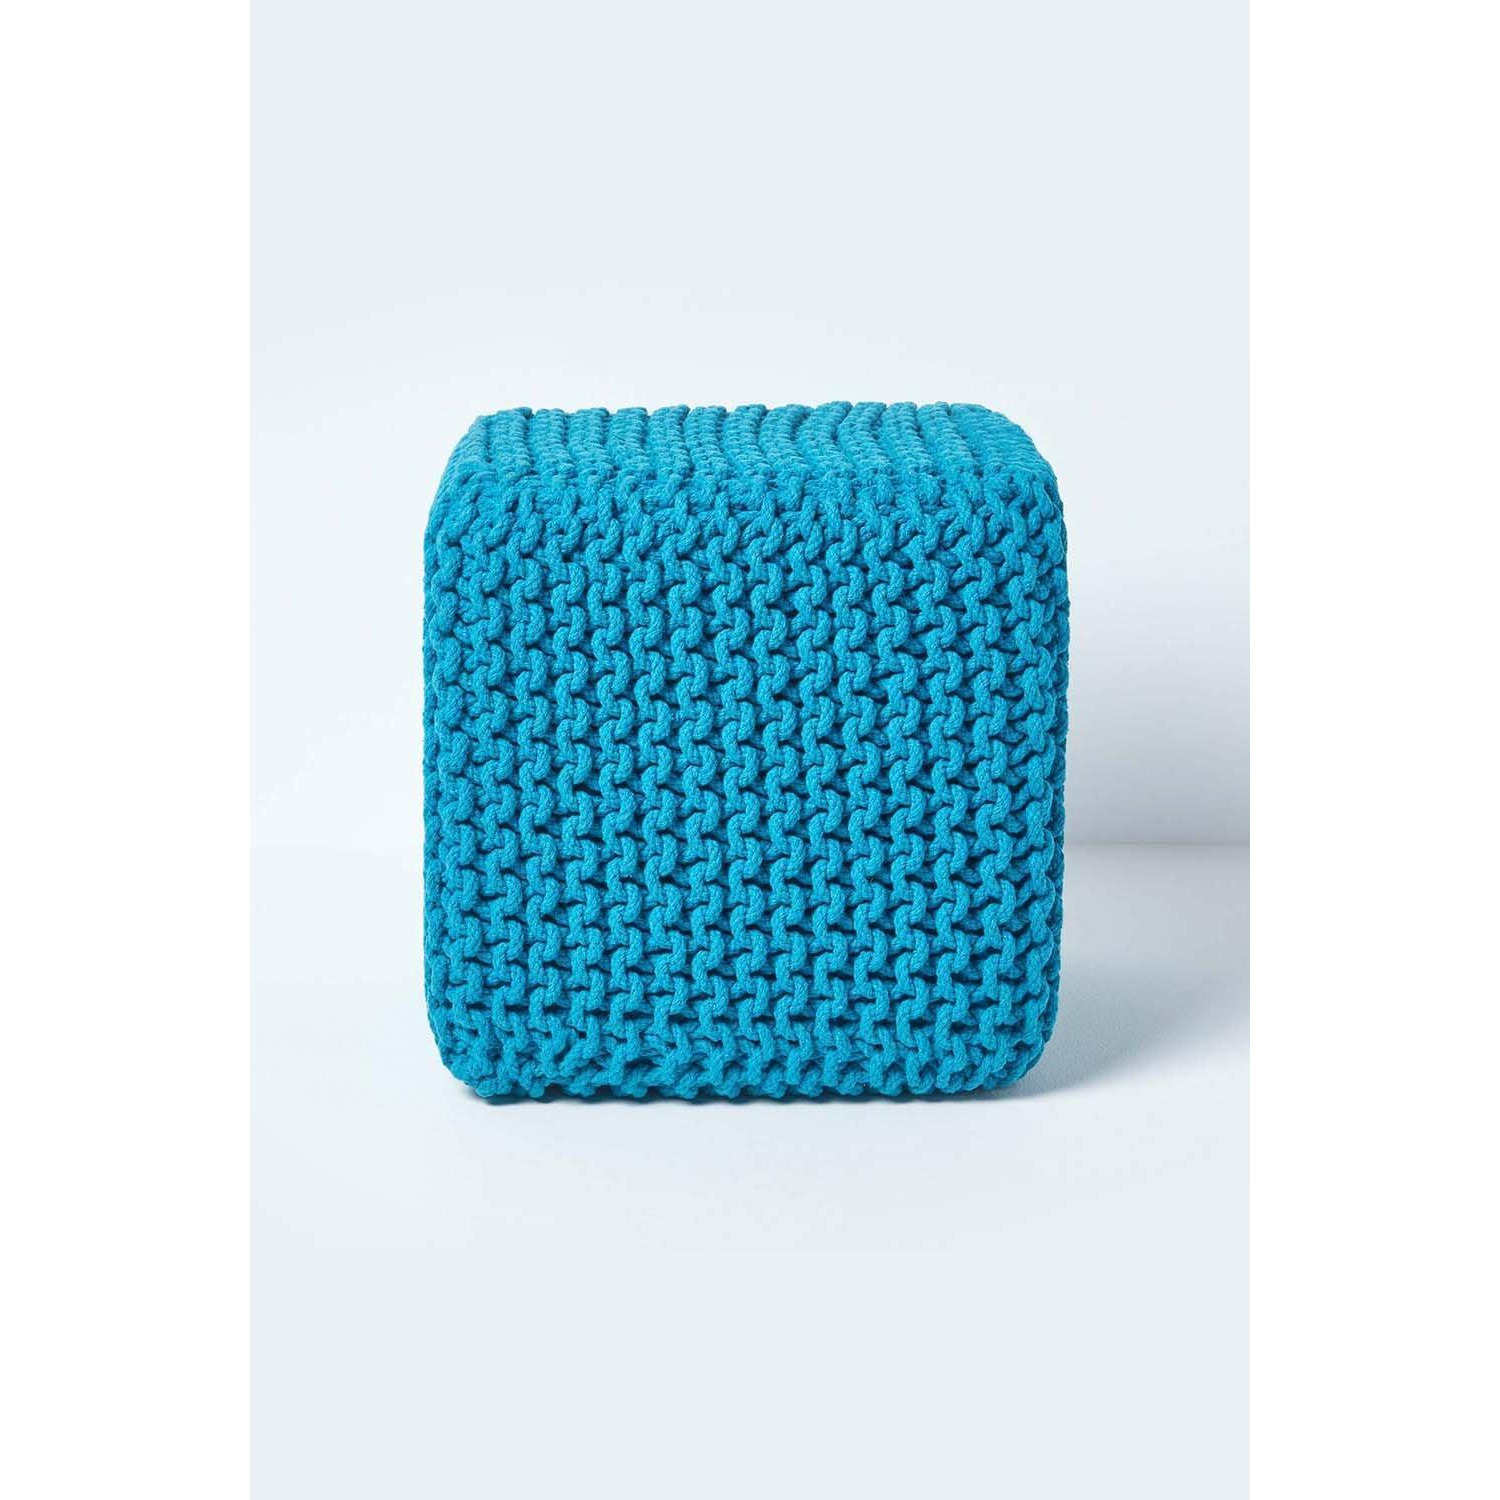 Cube Cotton Knitted Pouffe Footstool - image 1